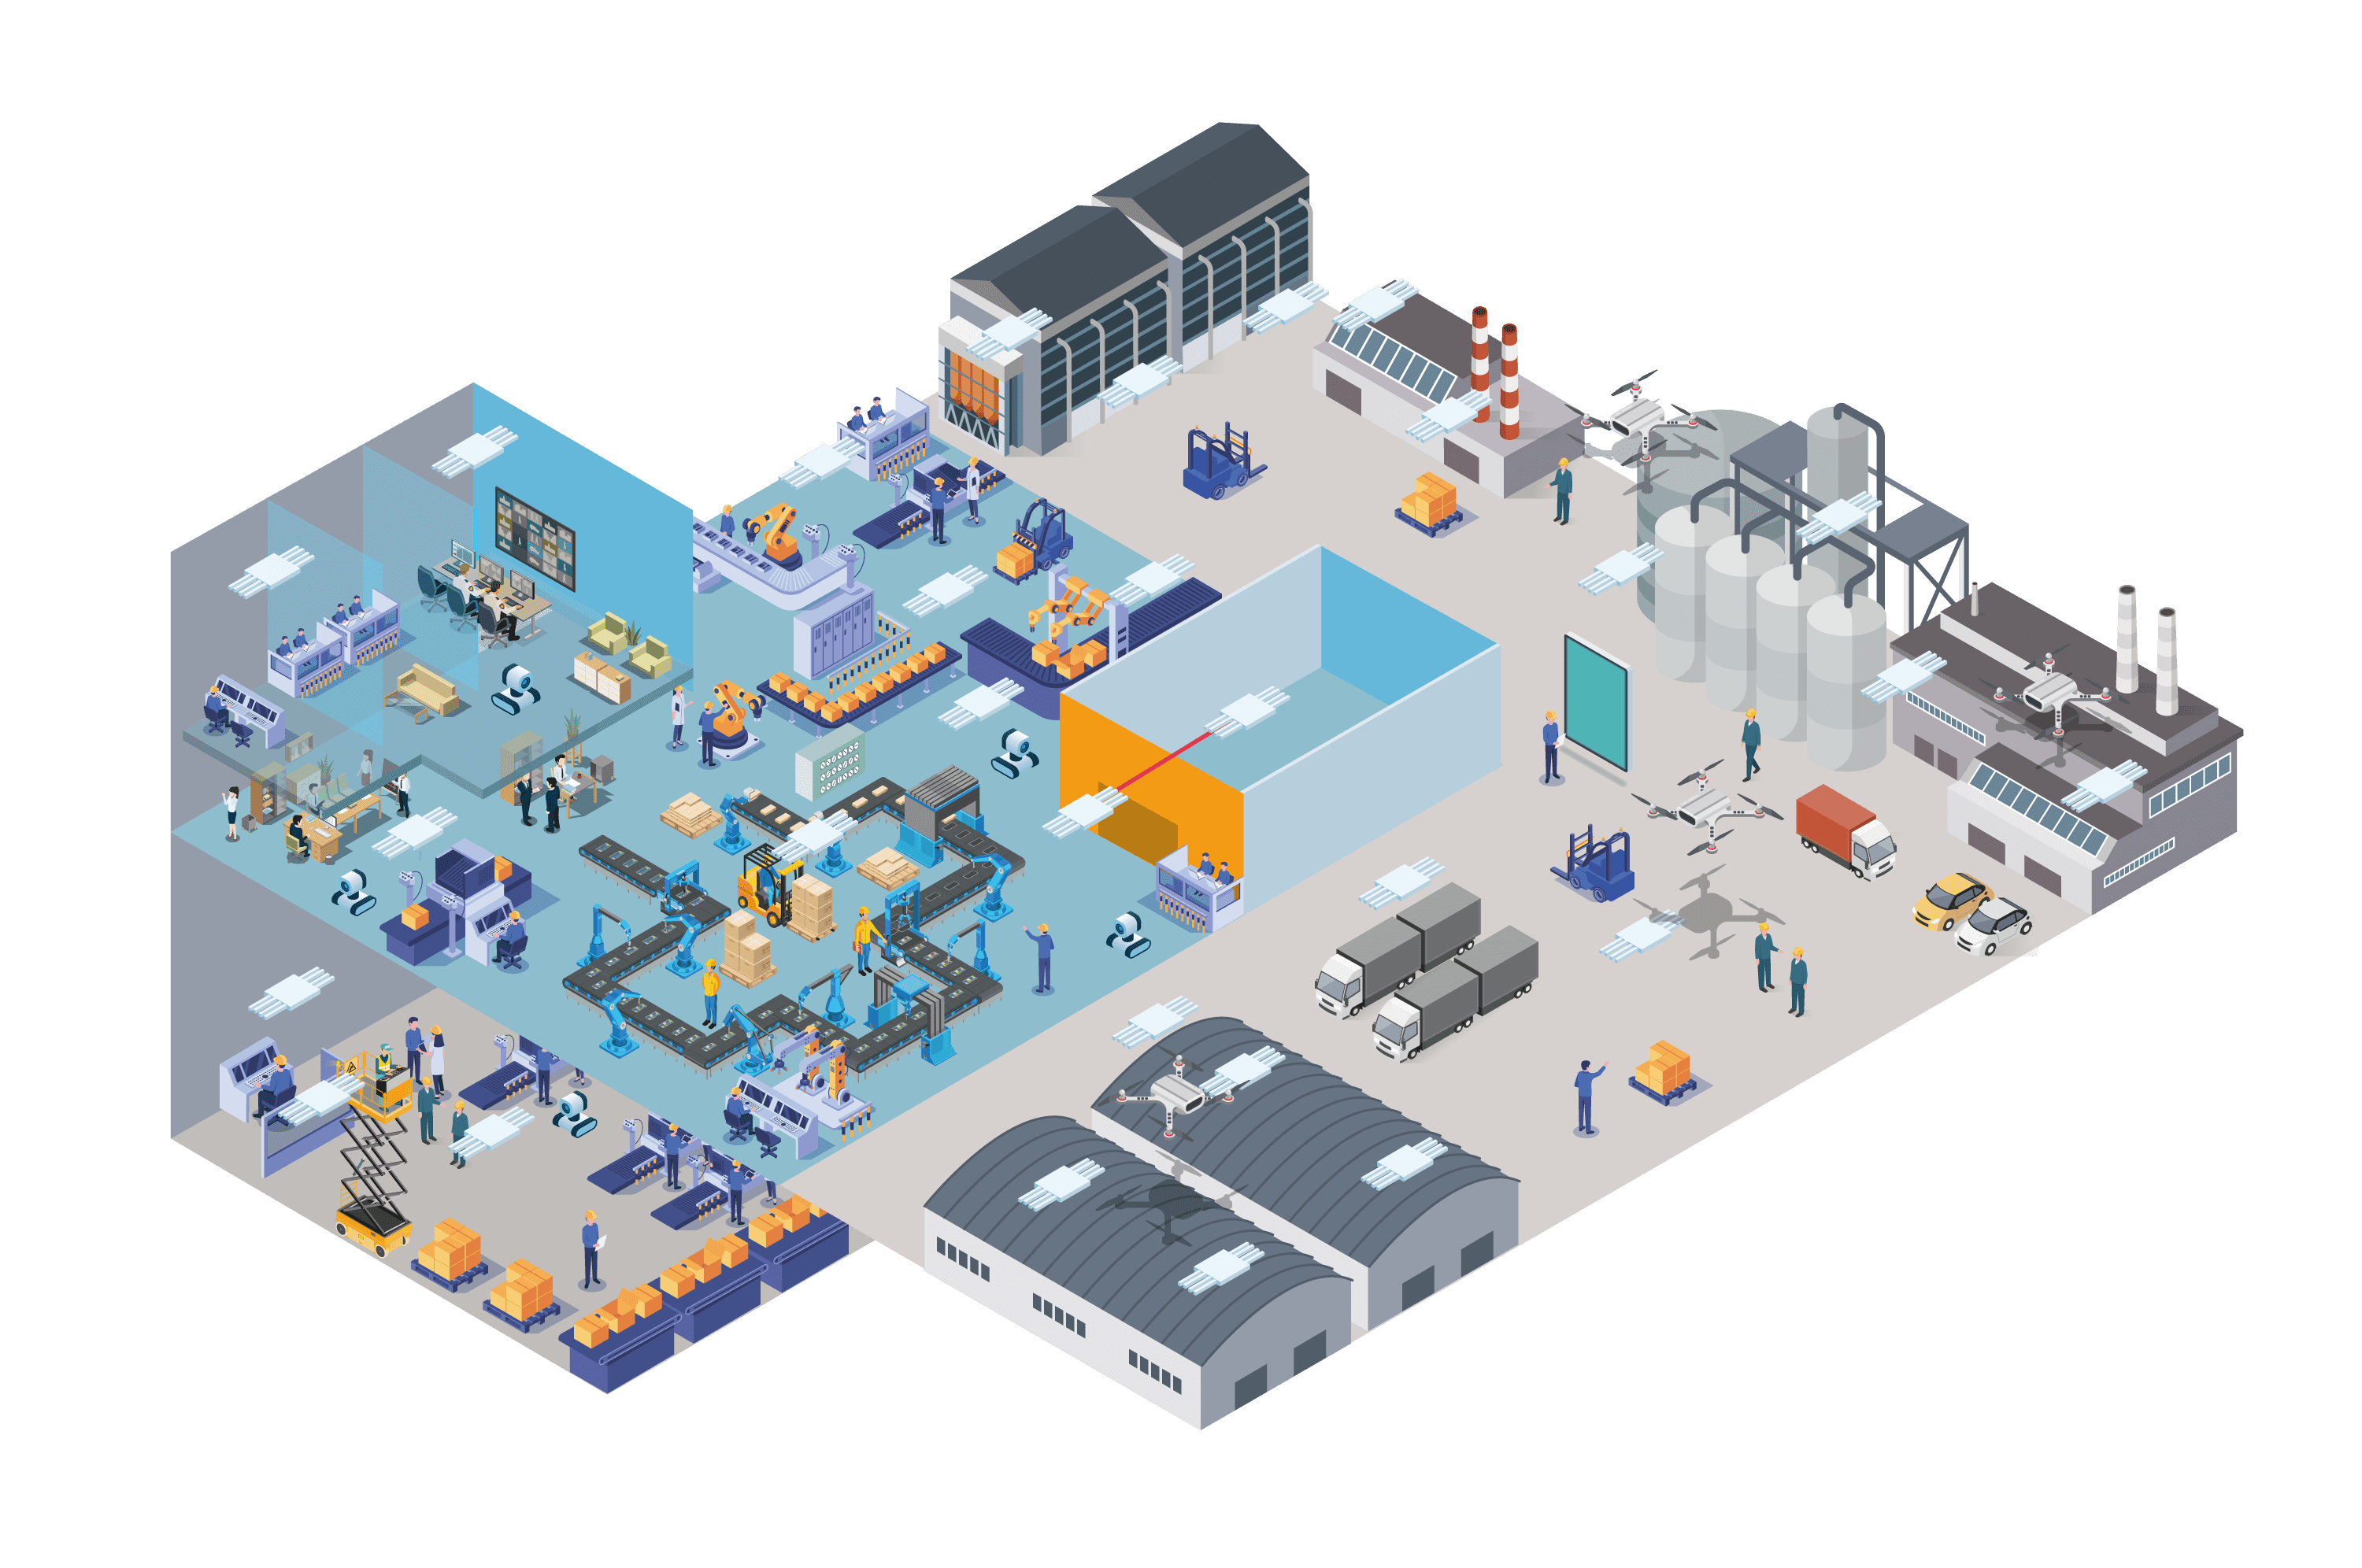 The best mesh Wi-Fi for factories